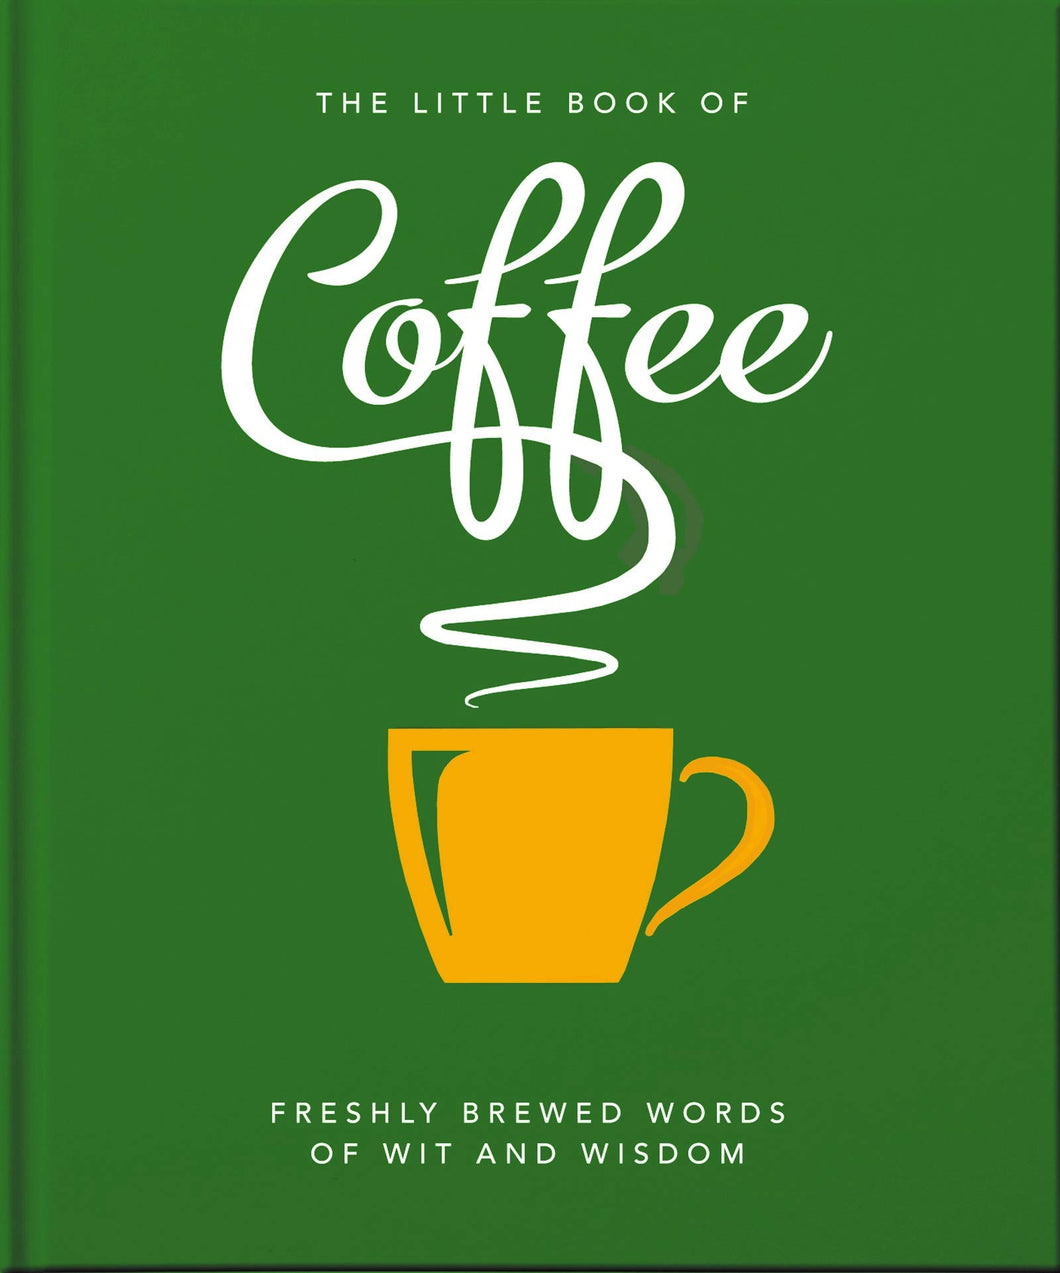 The little book of Coffee